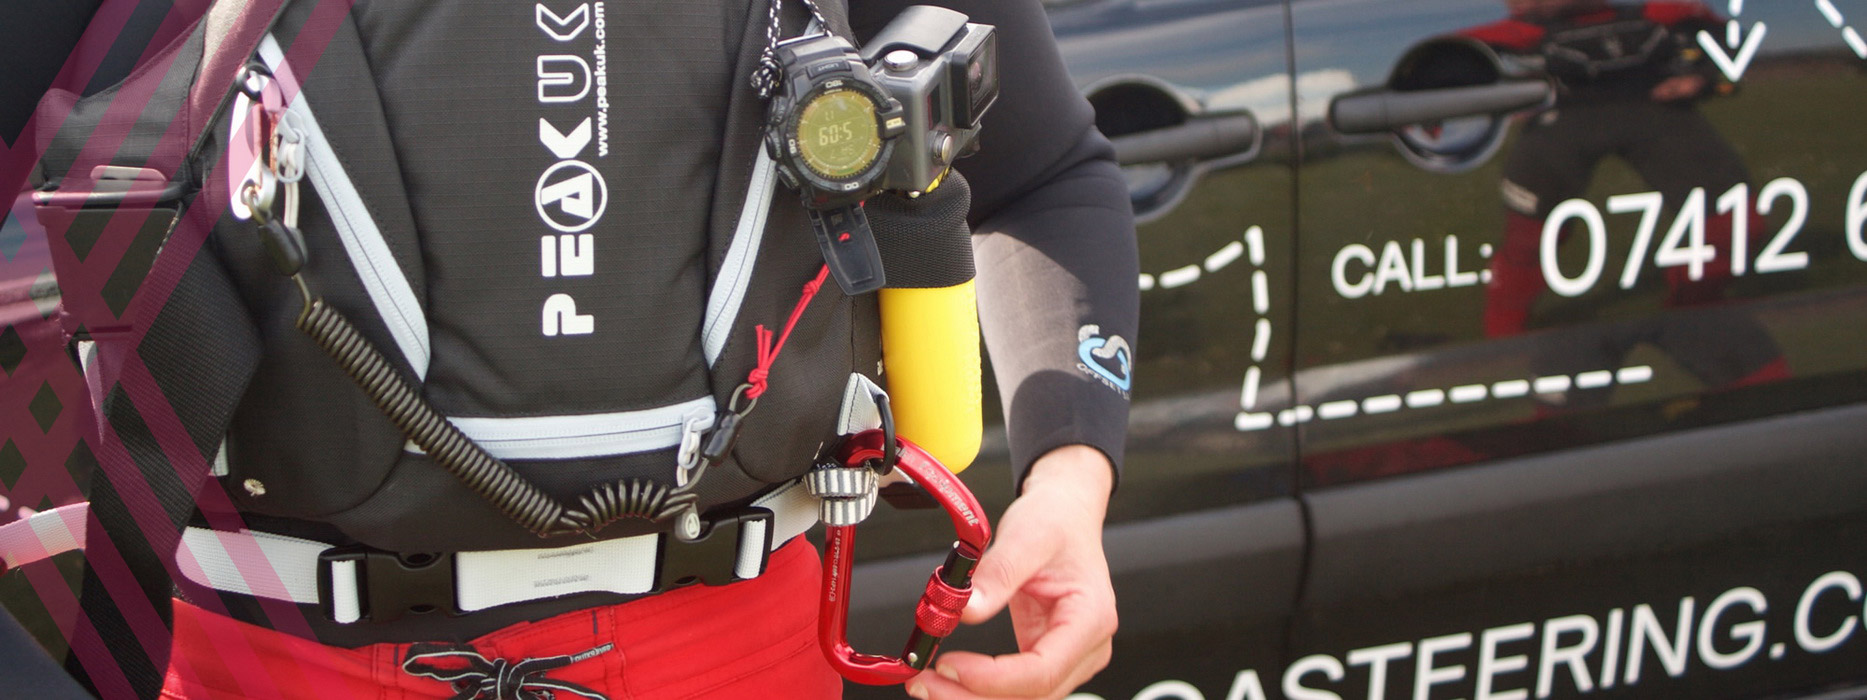 We have the safest equipment for coasteering at Croyde